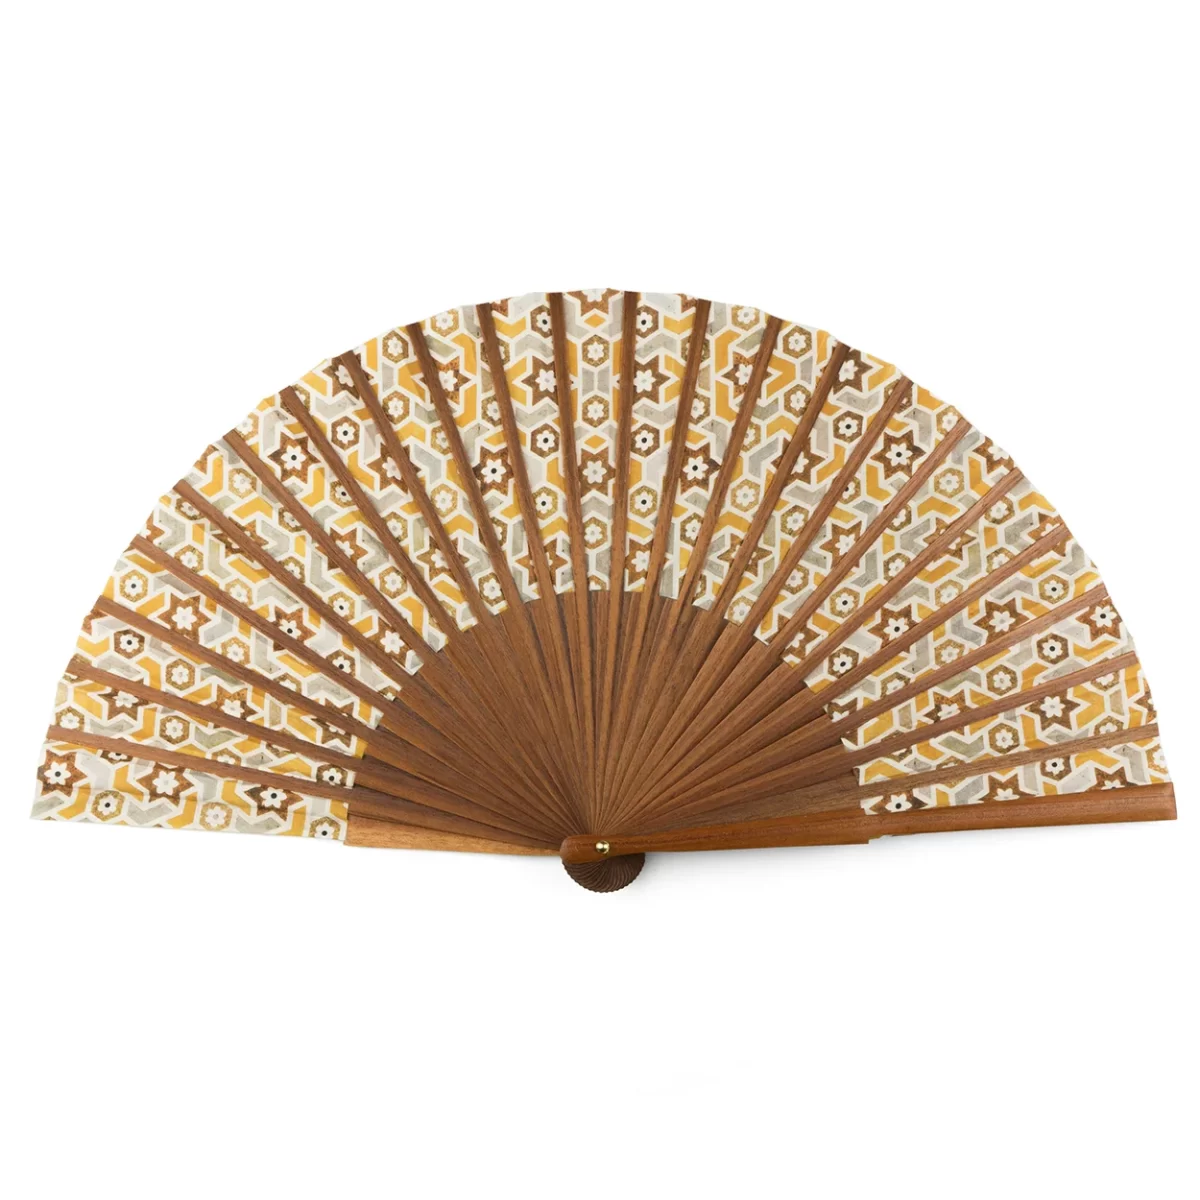 Silk and wood fan with a geometric Moroccan pattern in brown tones on the back.